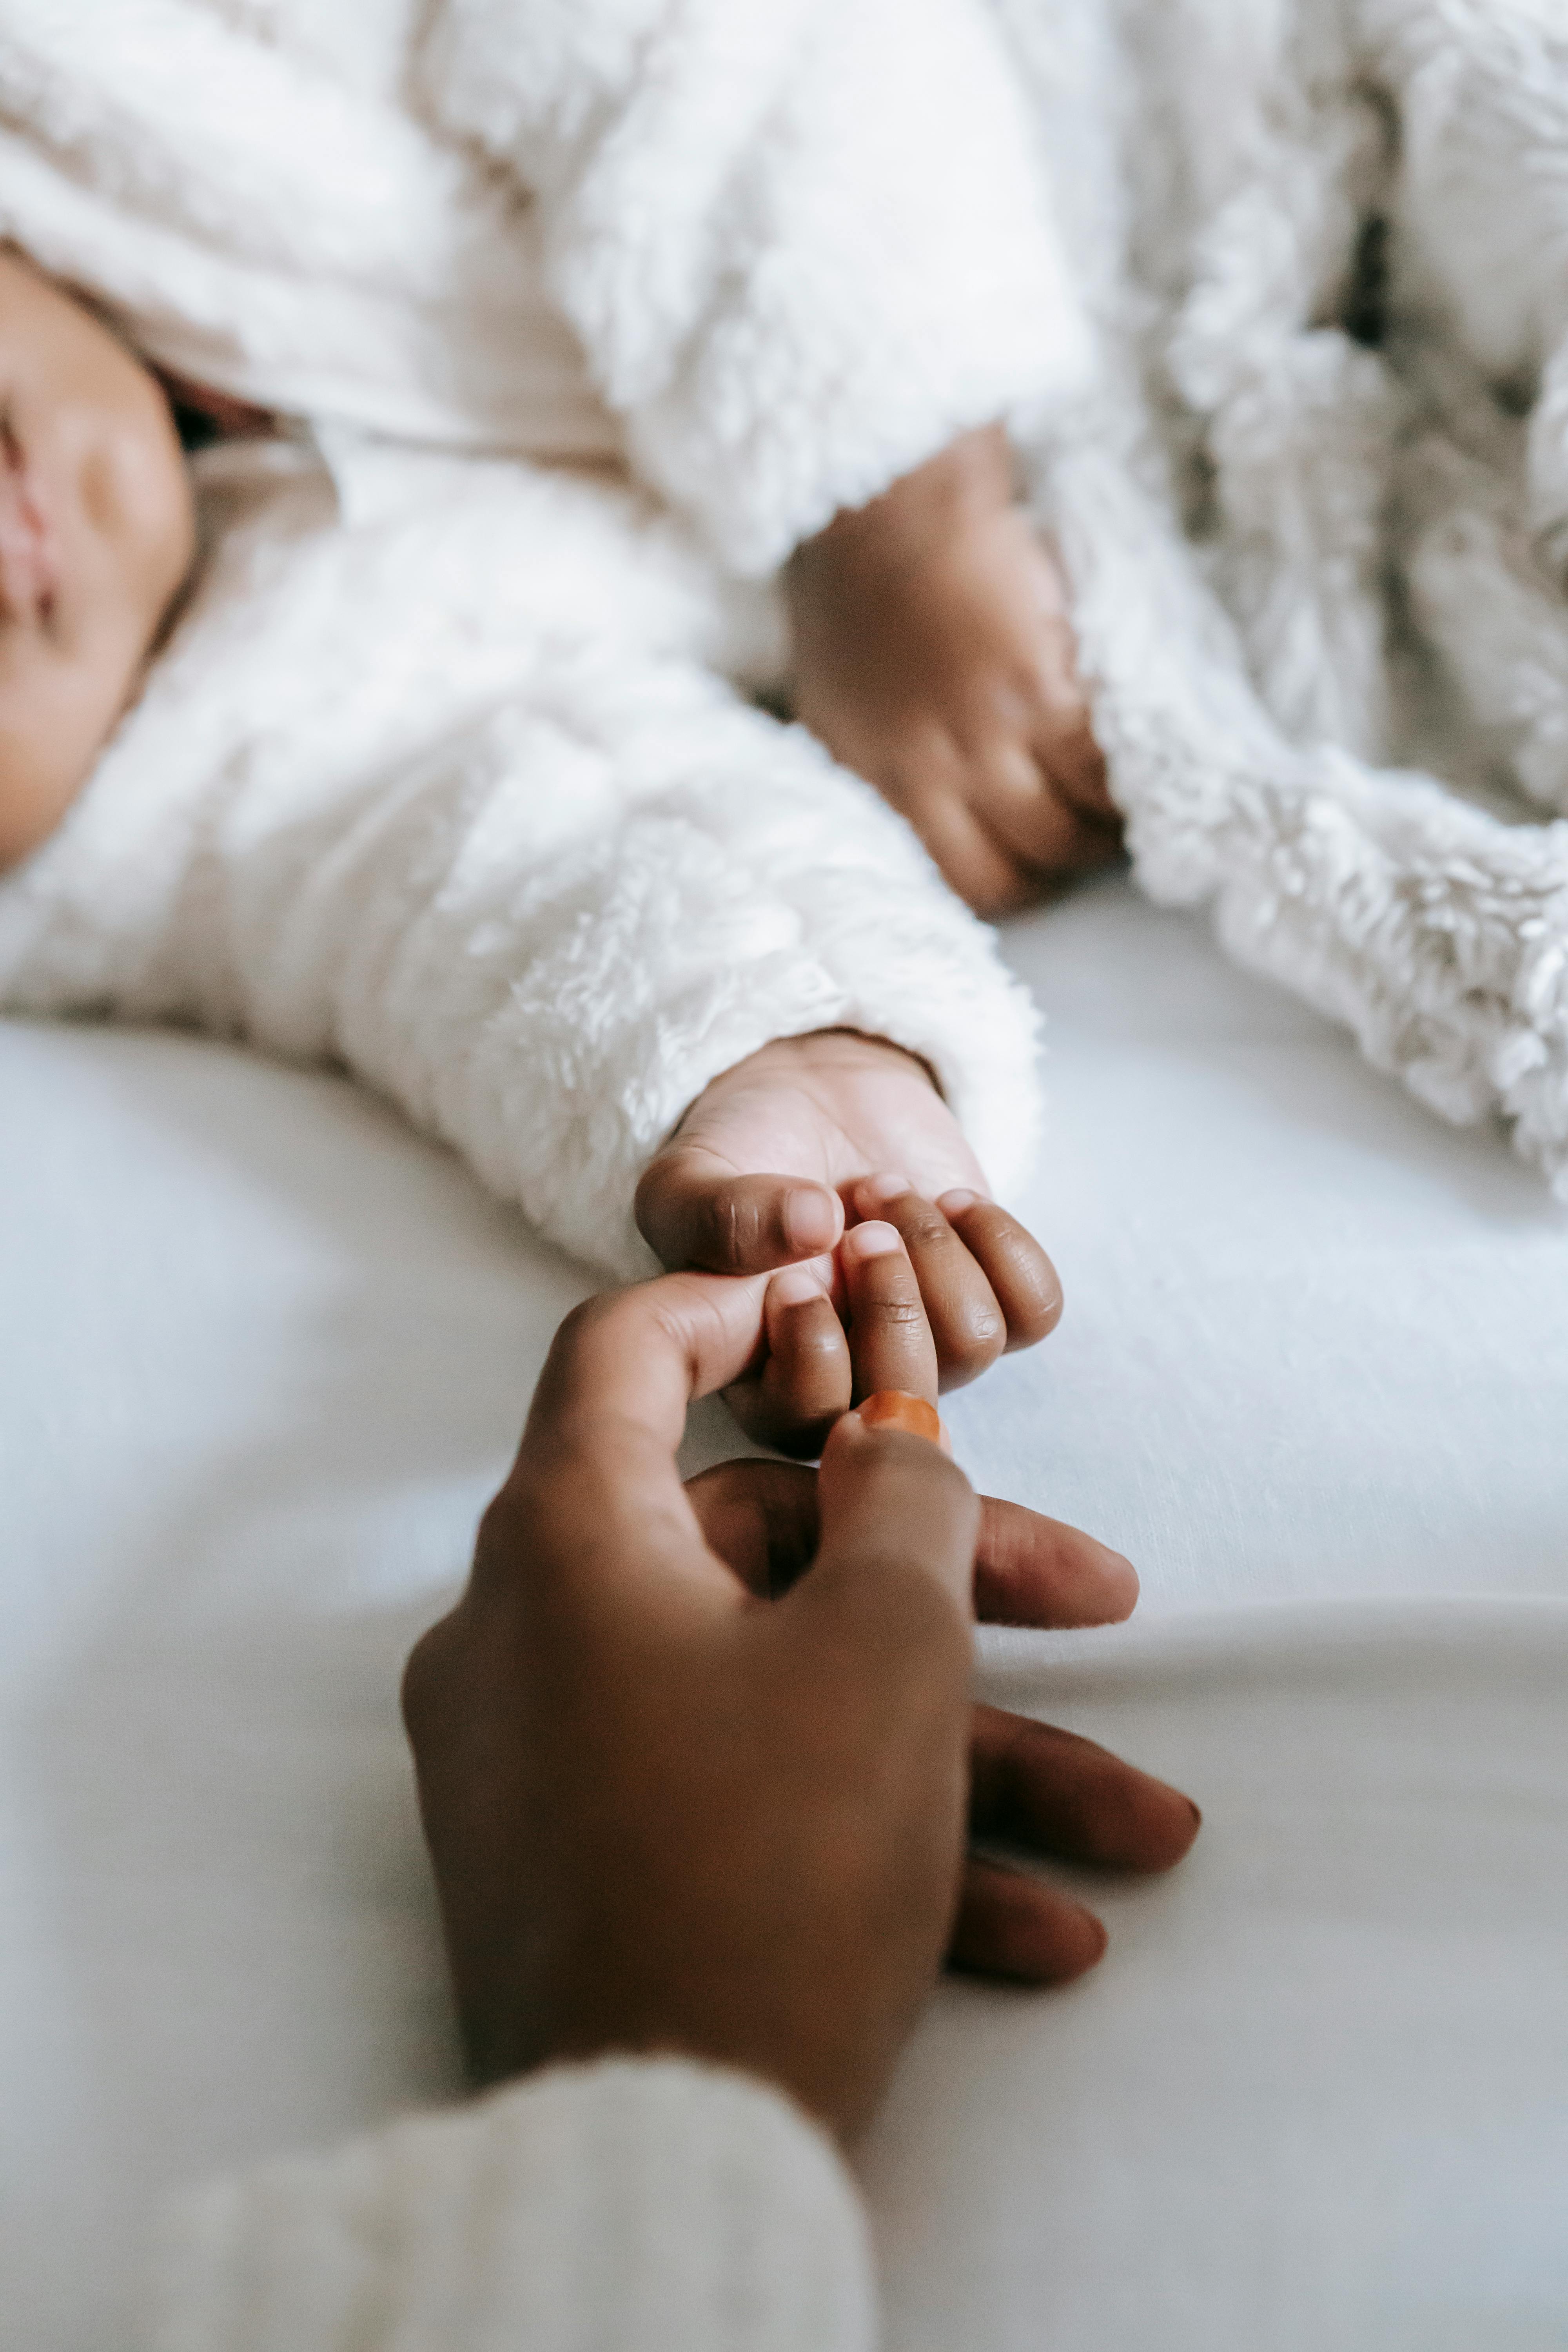 A person touching a baby's hand | Source: Pexels